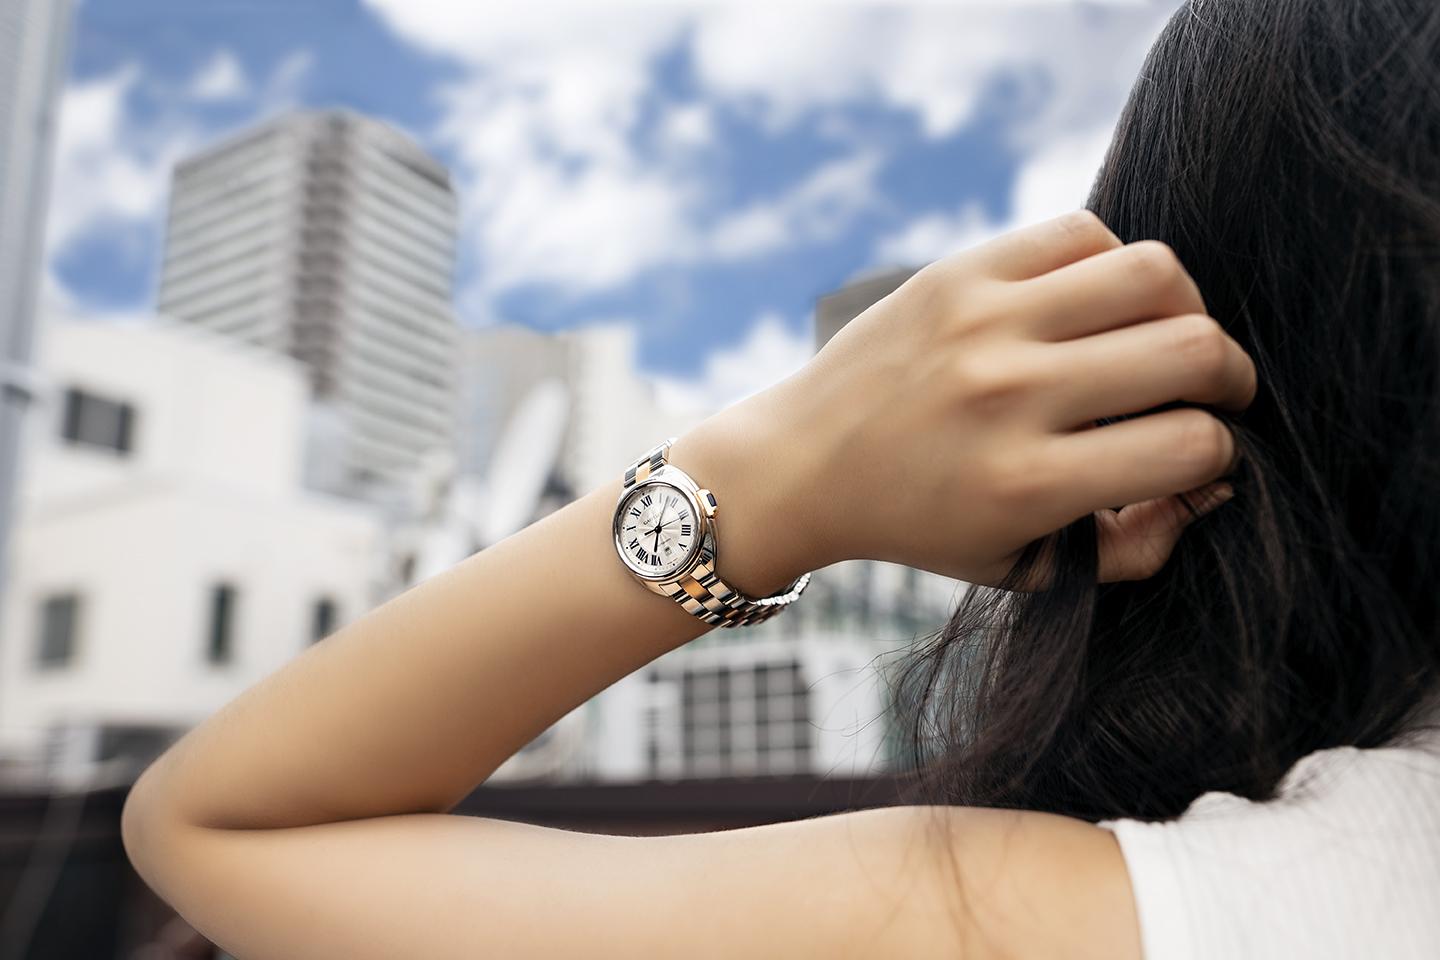 Watches from 5 World-Renowned Fashion Brands